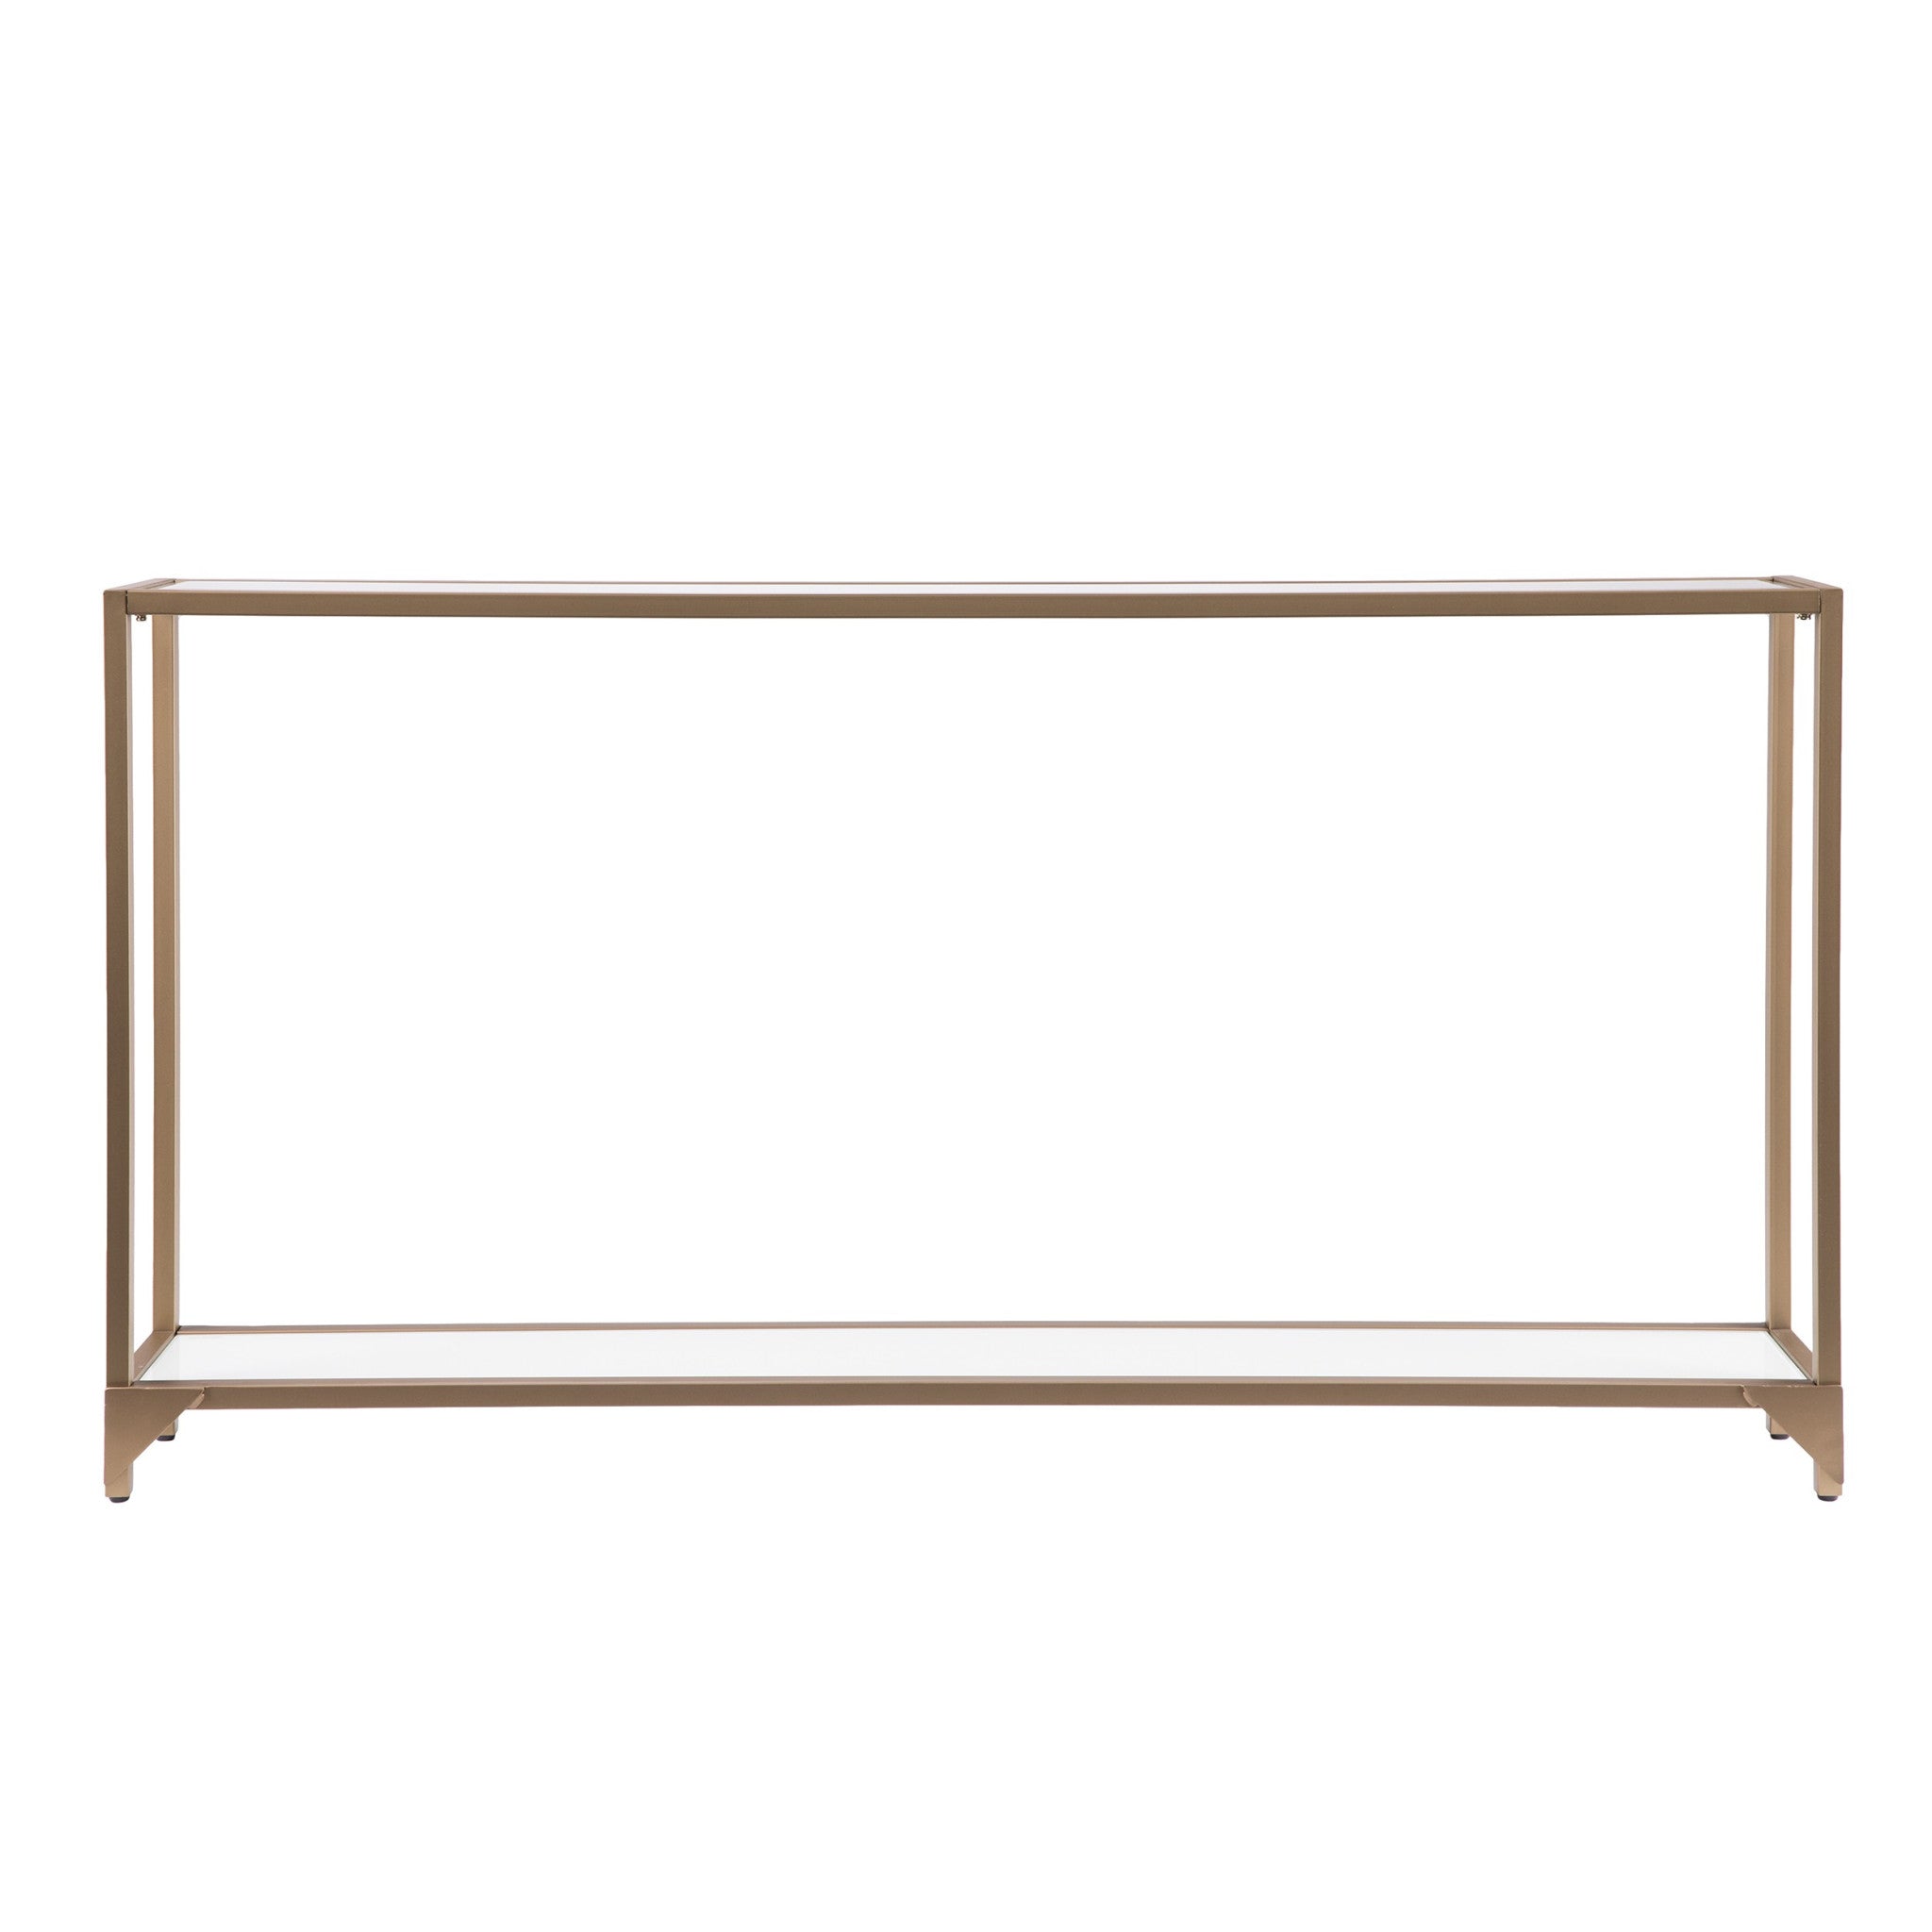 56" Clear and Gold Glass Floor Shelf Console Table With Storage